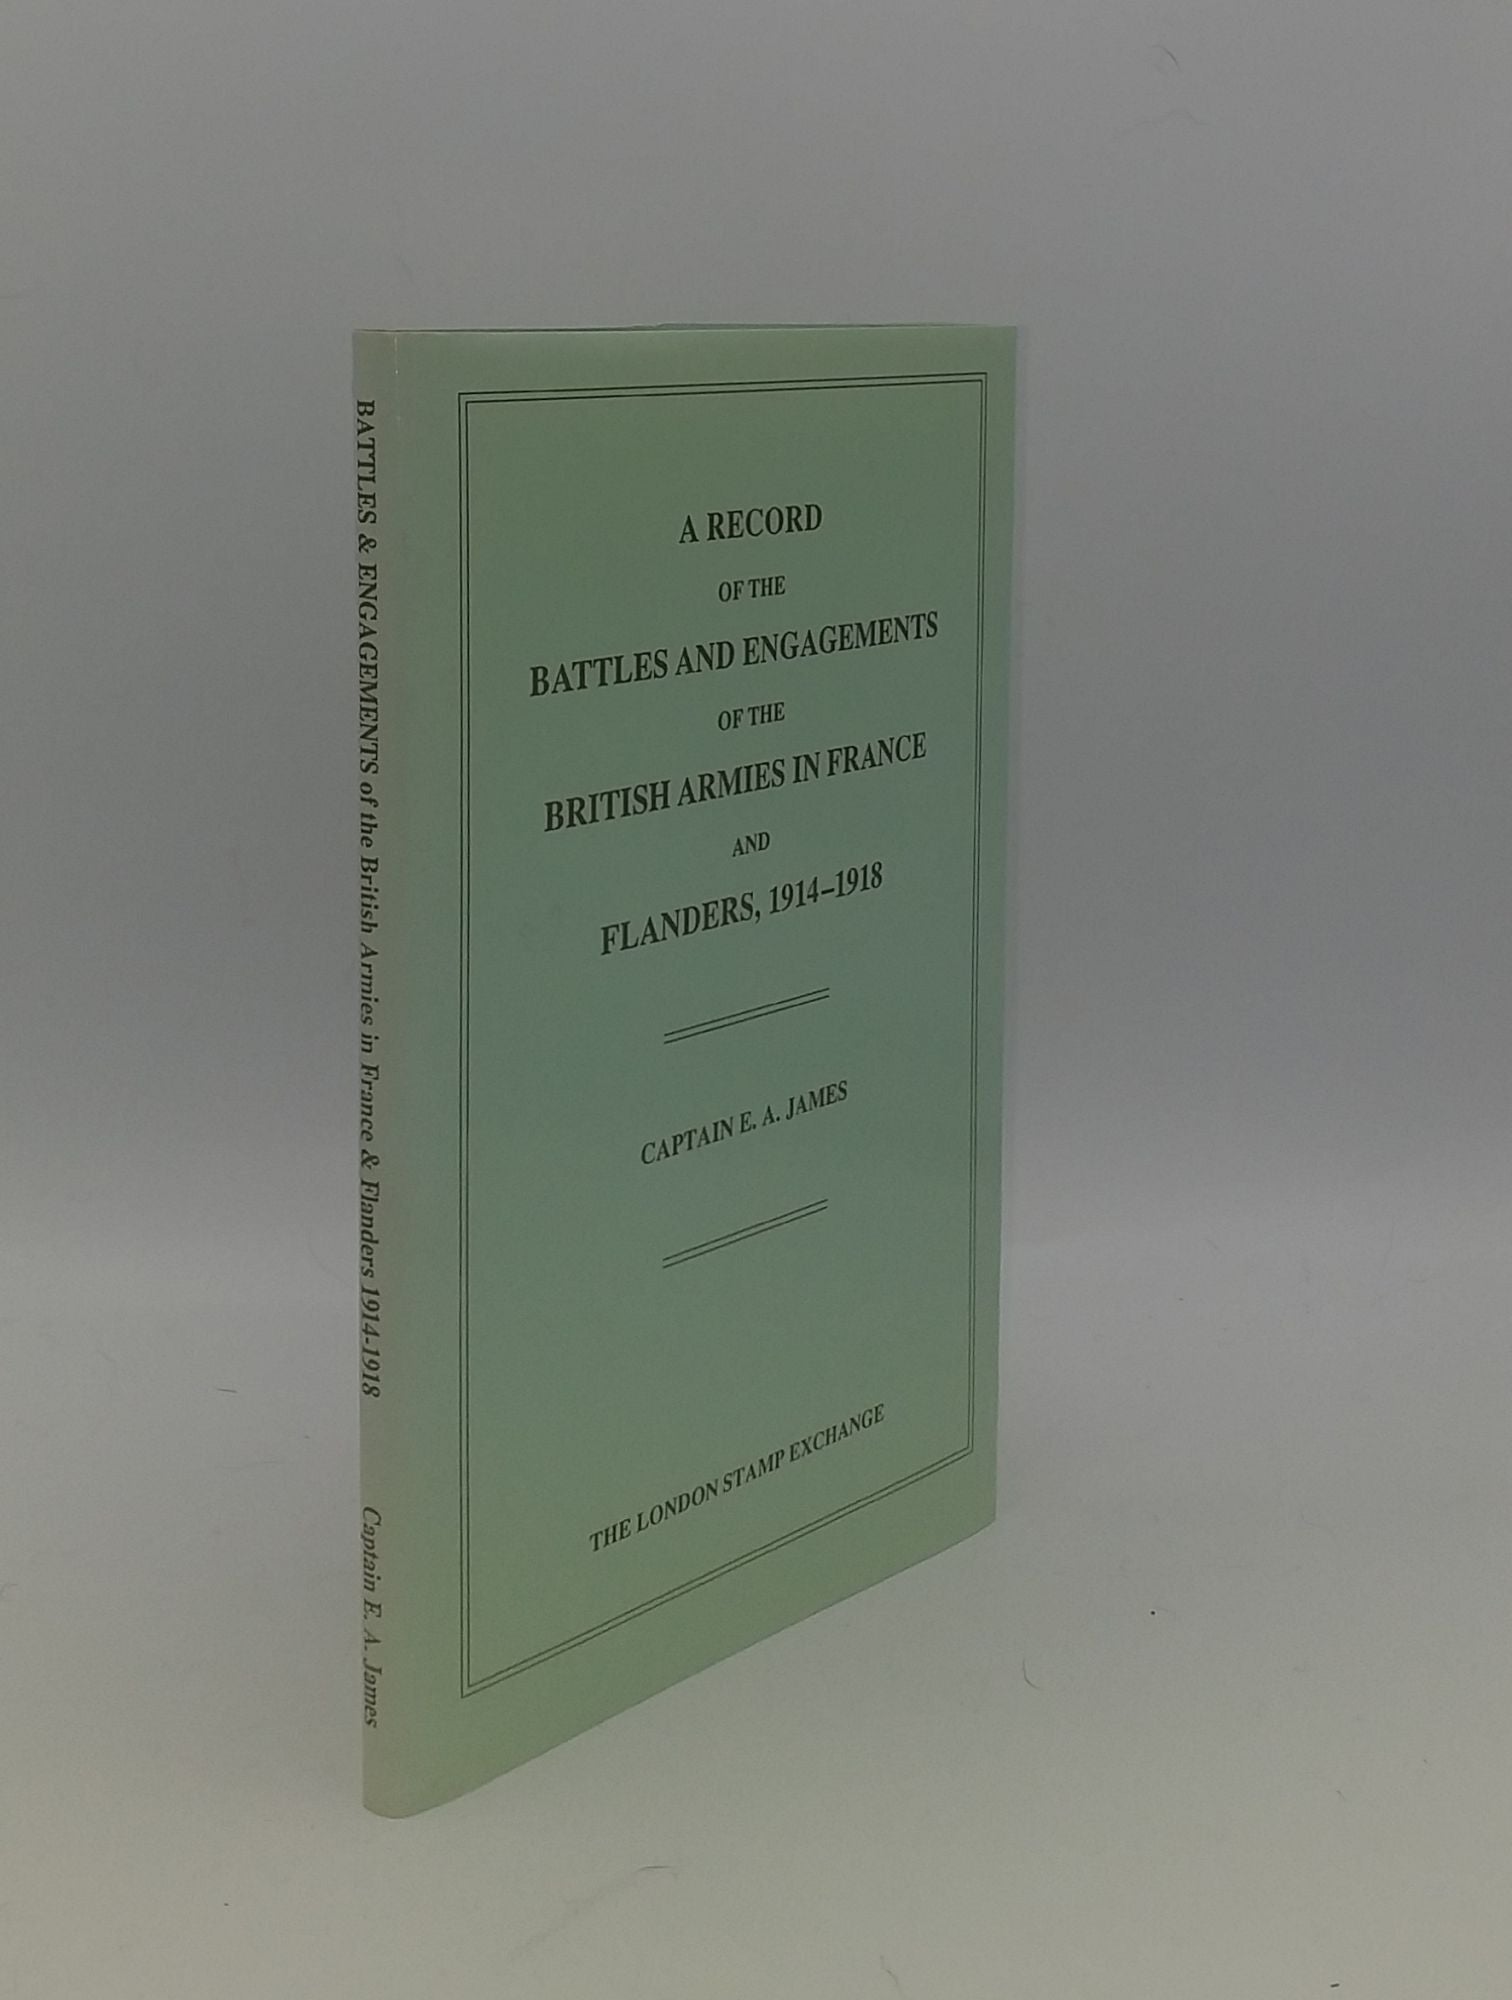 JAMES E.A. - A Record of the Battles and Engagements of the British Armies in France and Flanders 1914-1918